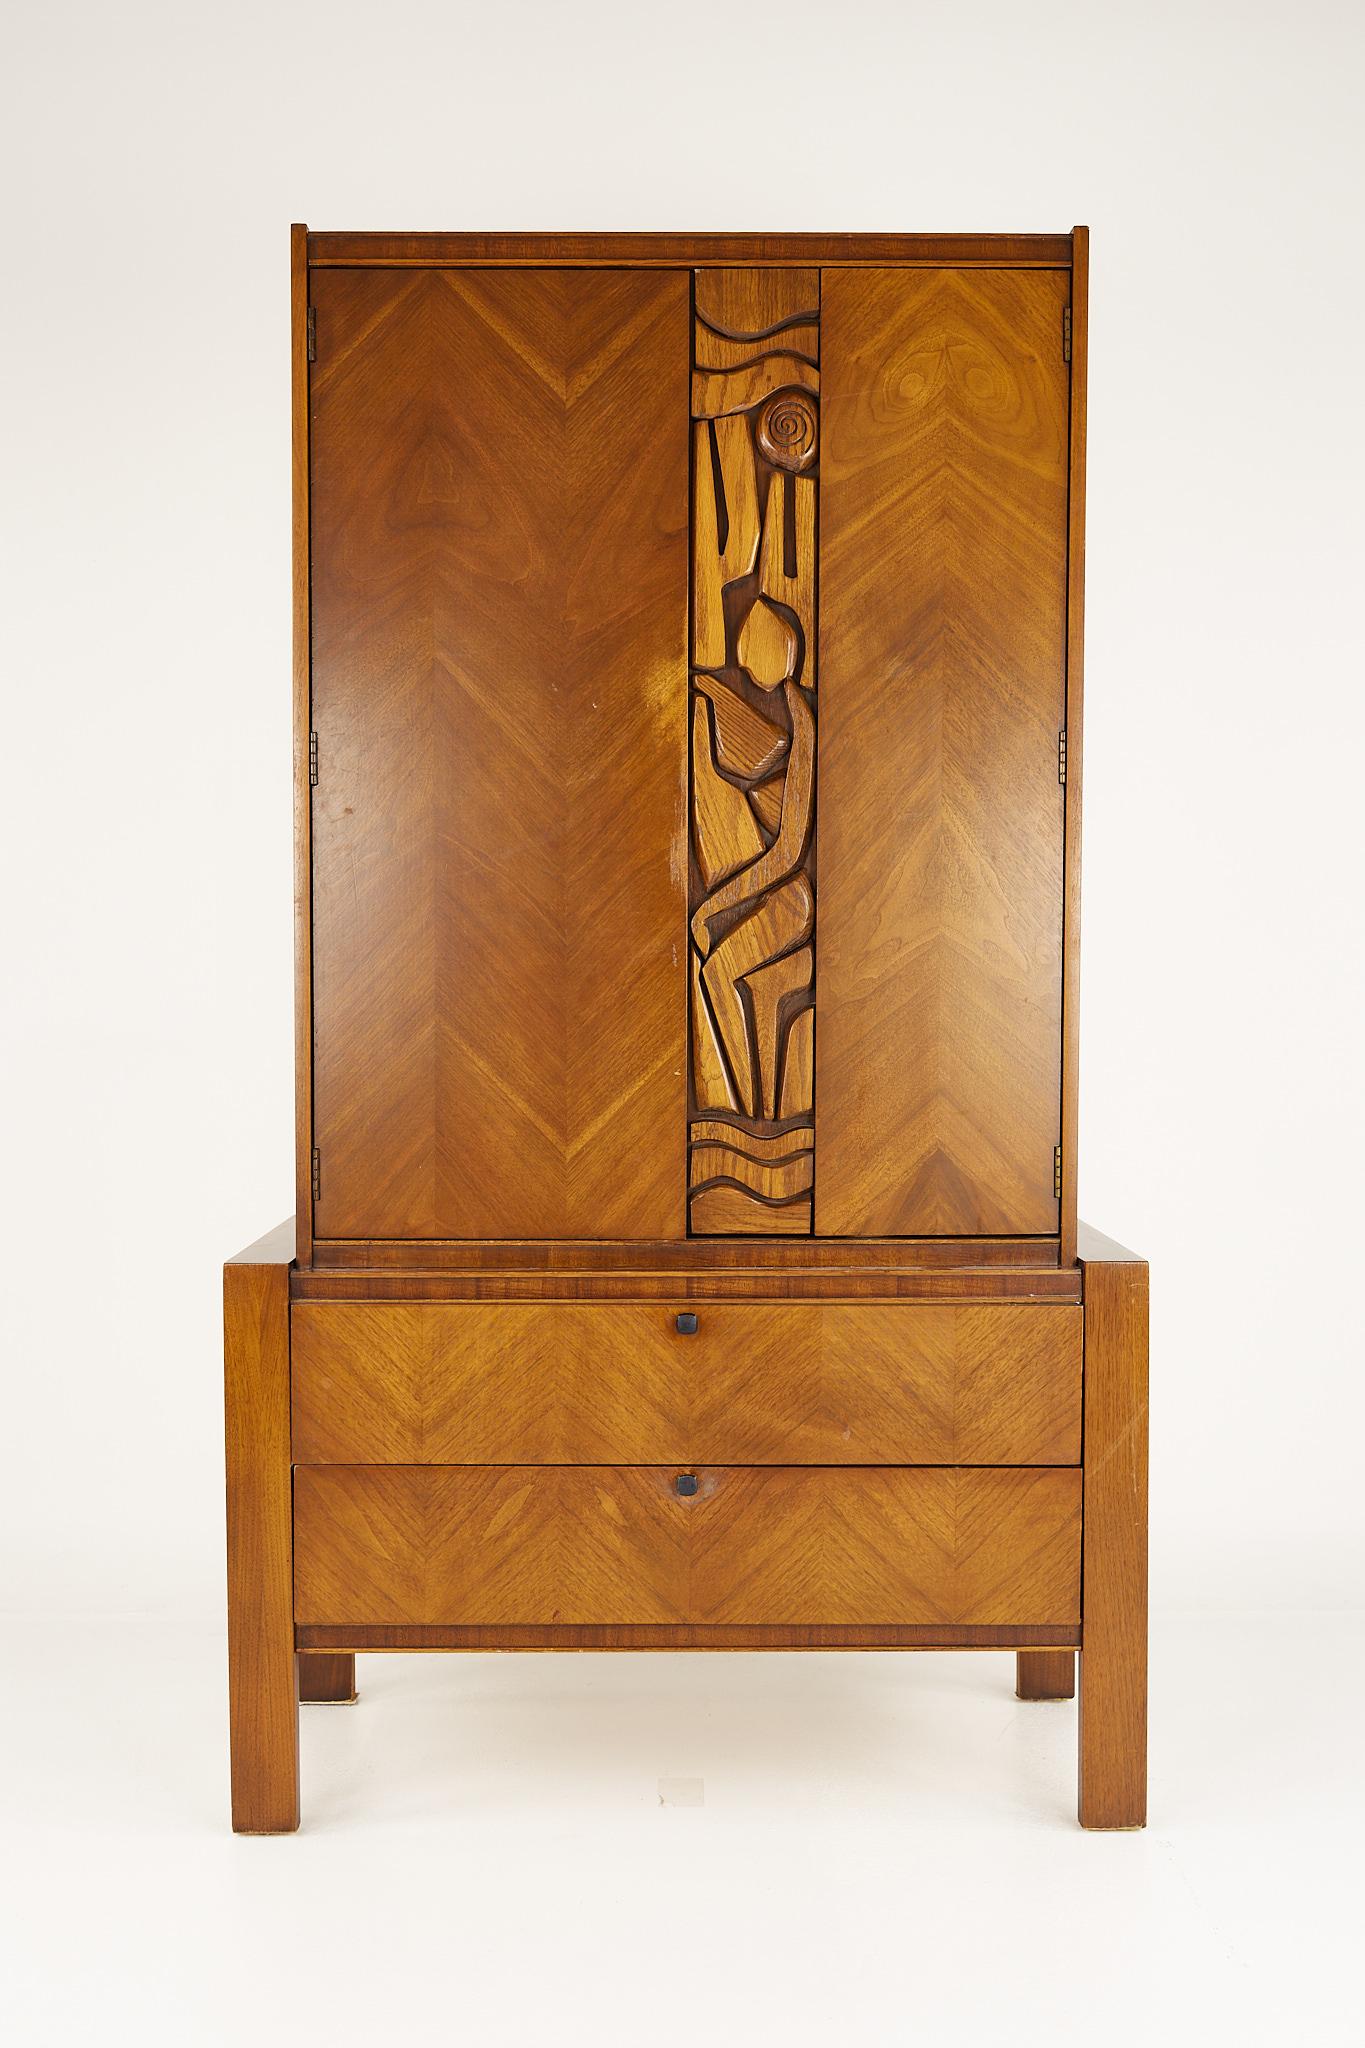 United Tiki Brutalist mid century walnut armoire gentlemans chest

This armoire measures: 40.75 wide x 20.25 deep x 71.25 inches high

?All pieces of furniture can be had in what we call restored vintage condition. That means the piece is